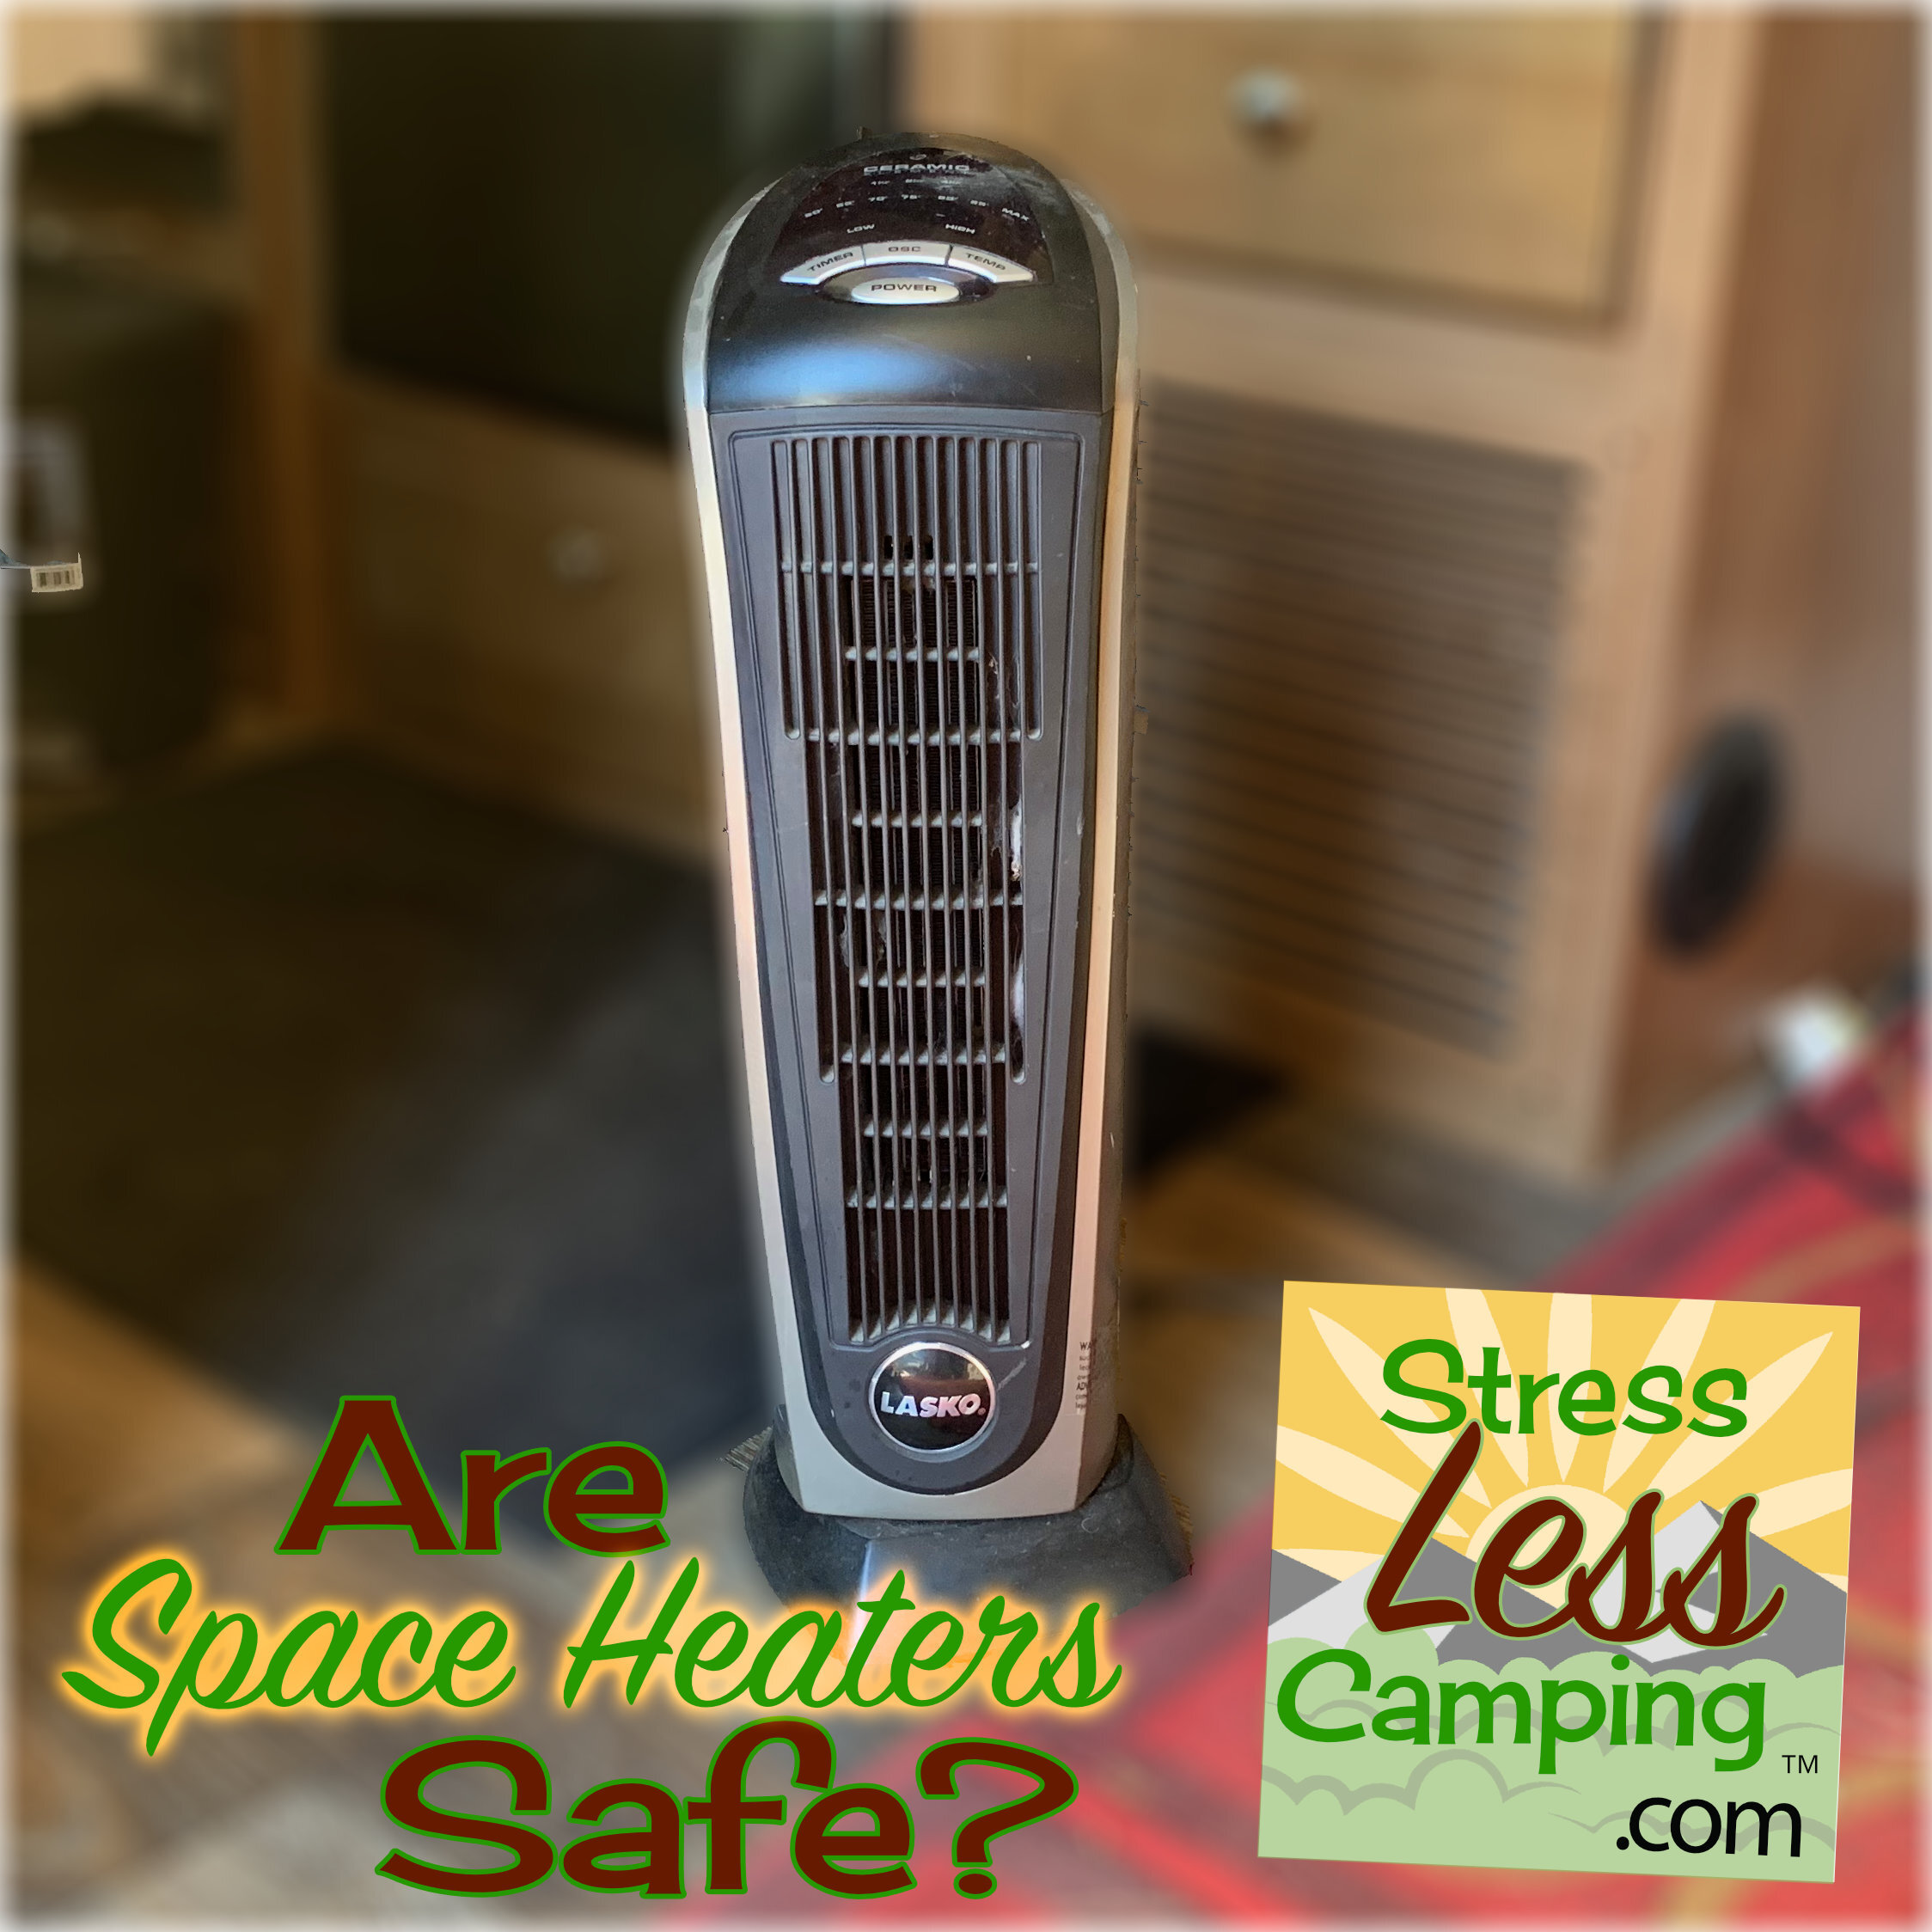 Is it safe to use an electric space heater in an RV? - StressLess Camping